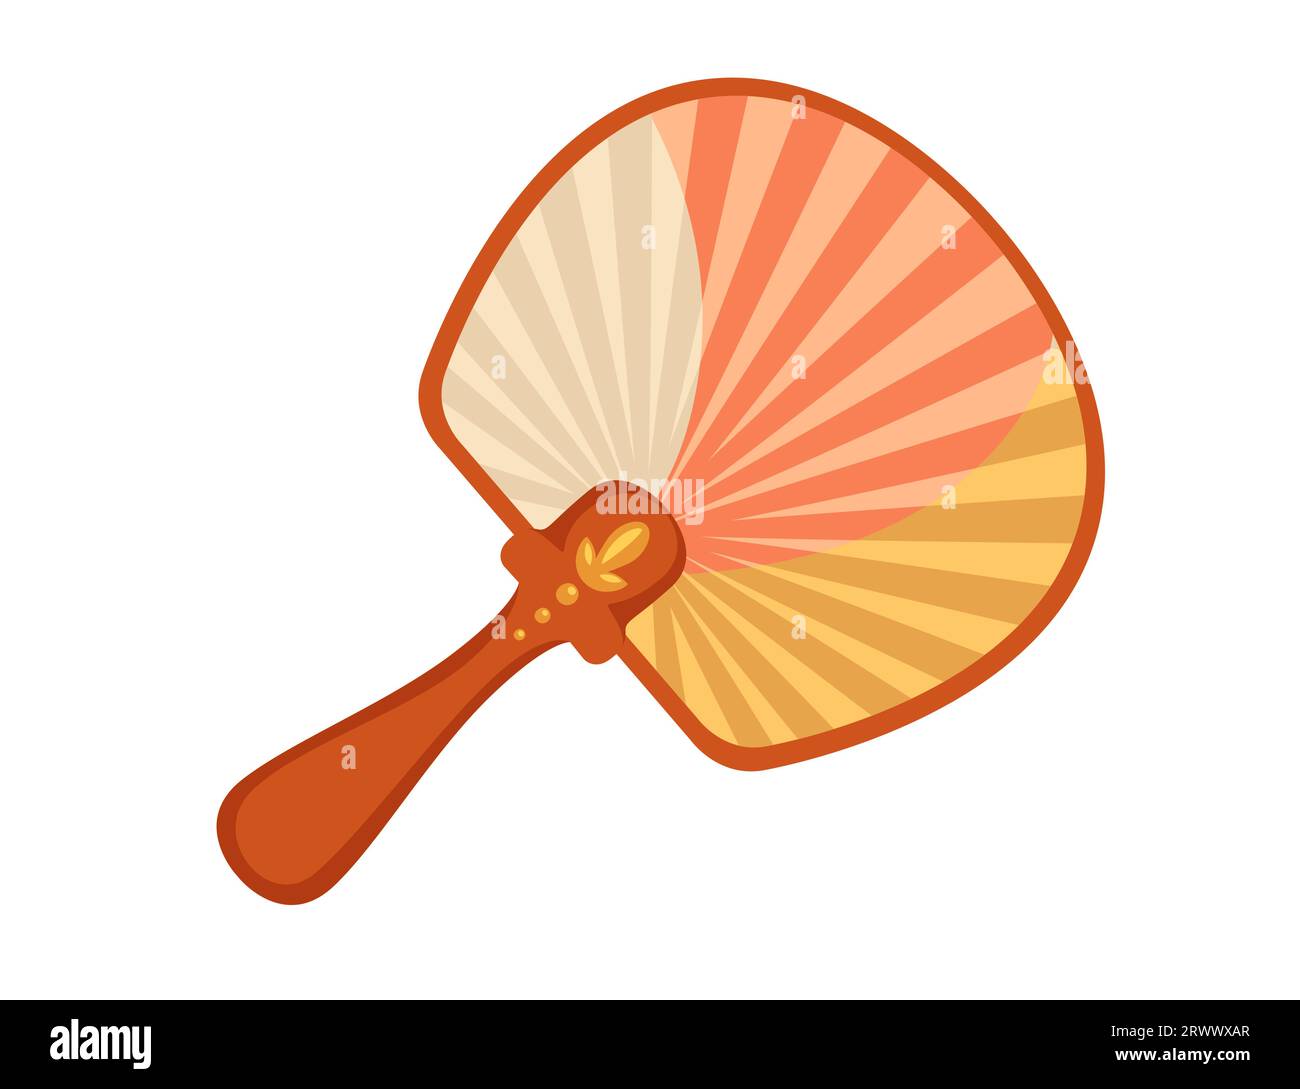 Classic asian style wooden hand fan with colorful drawing pattern vector illustration isolated on white background Stock Vector